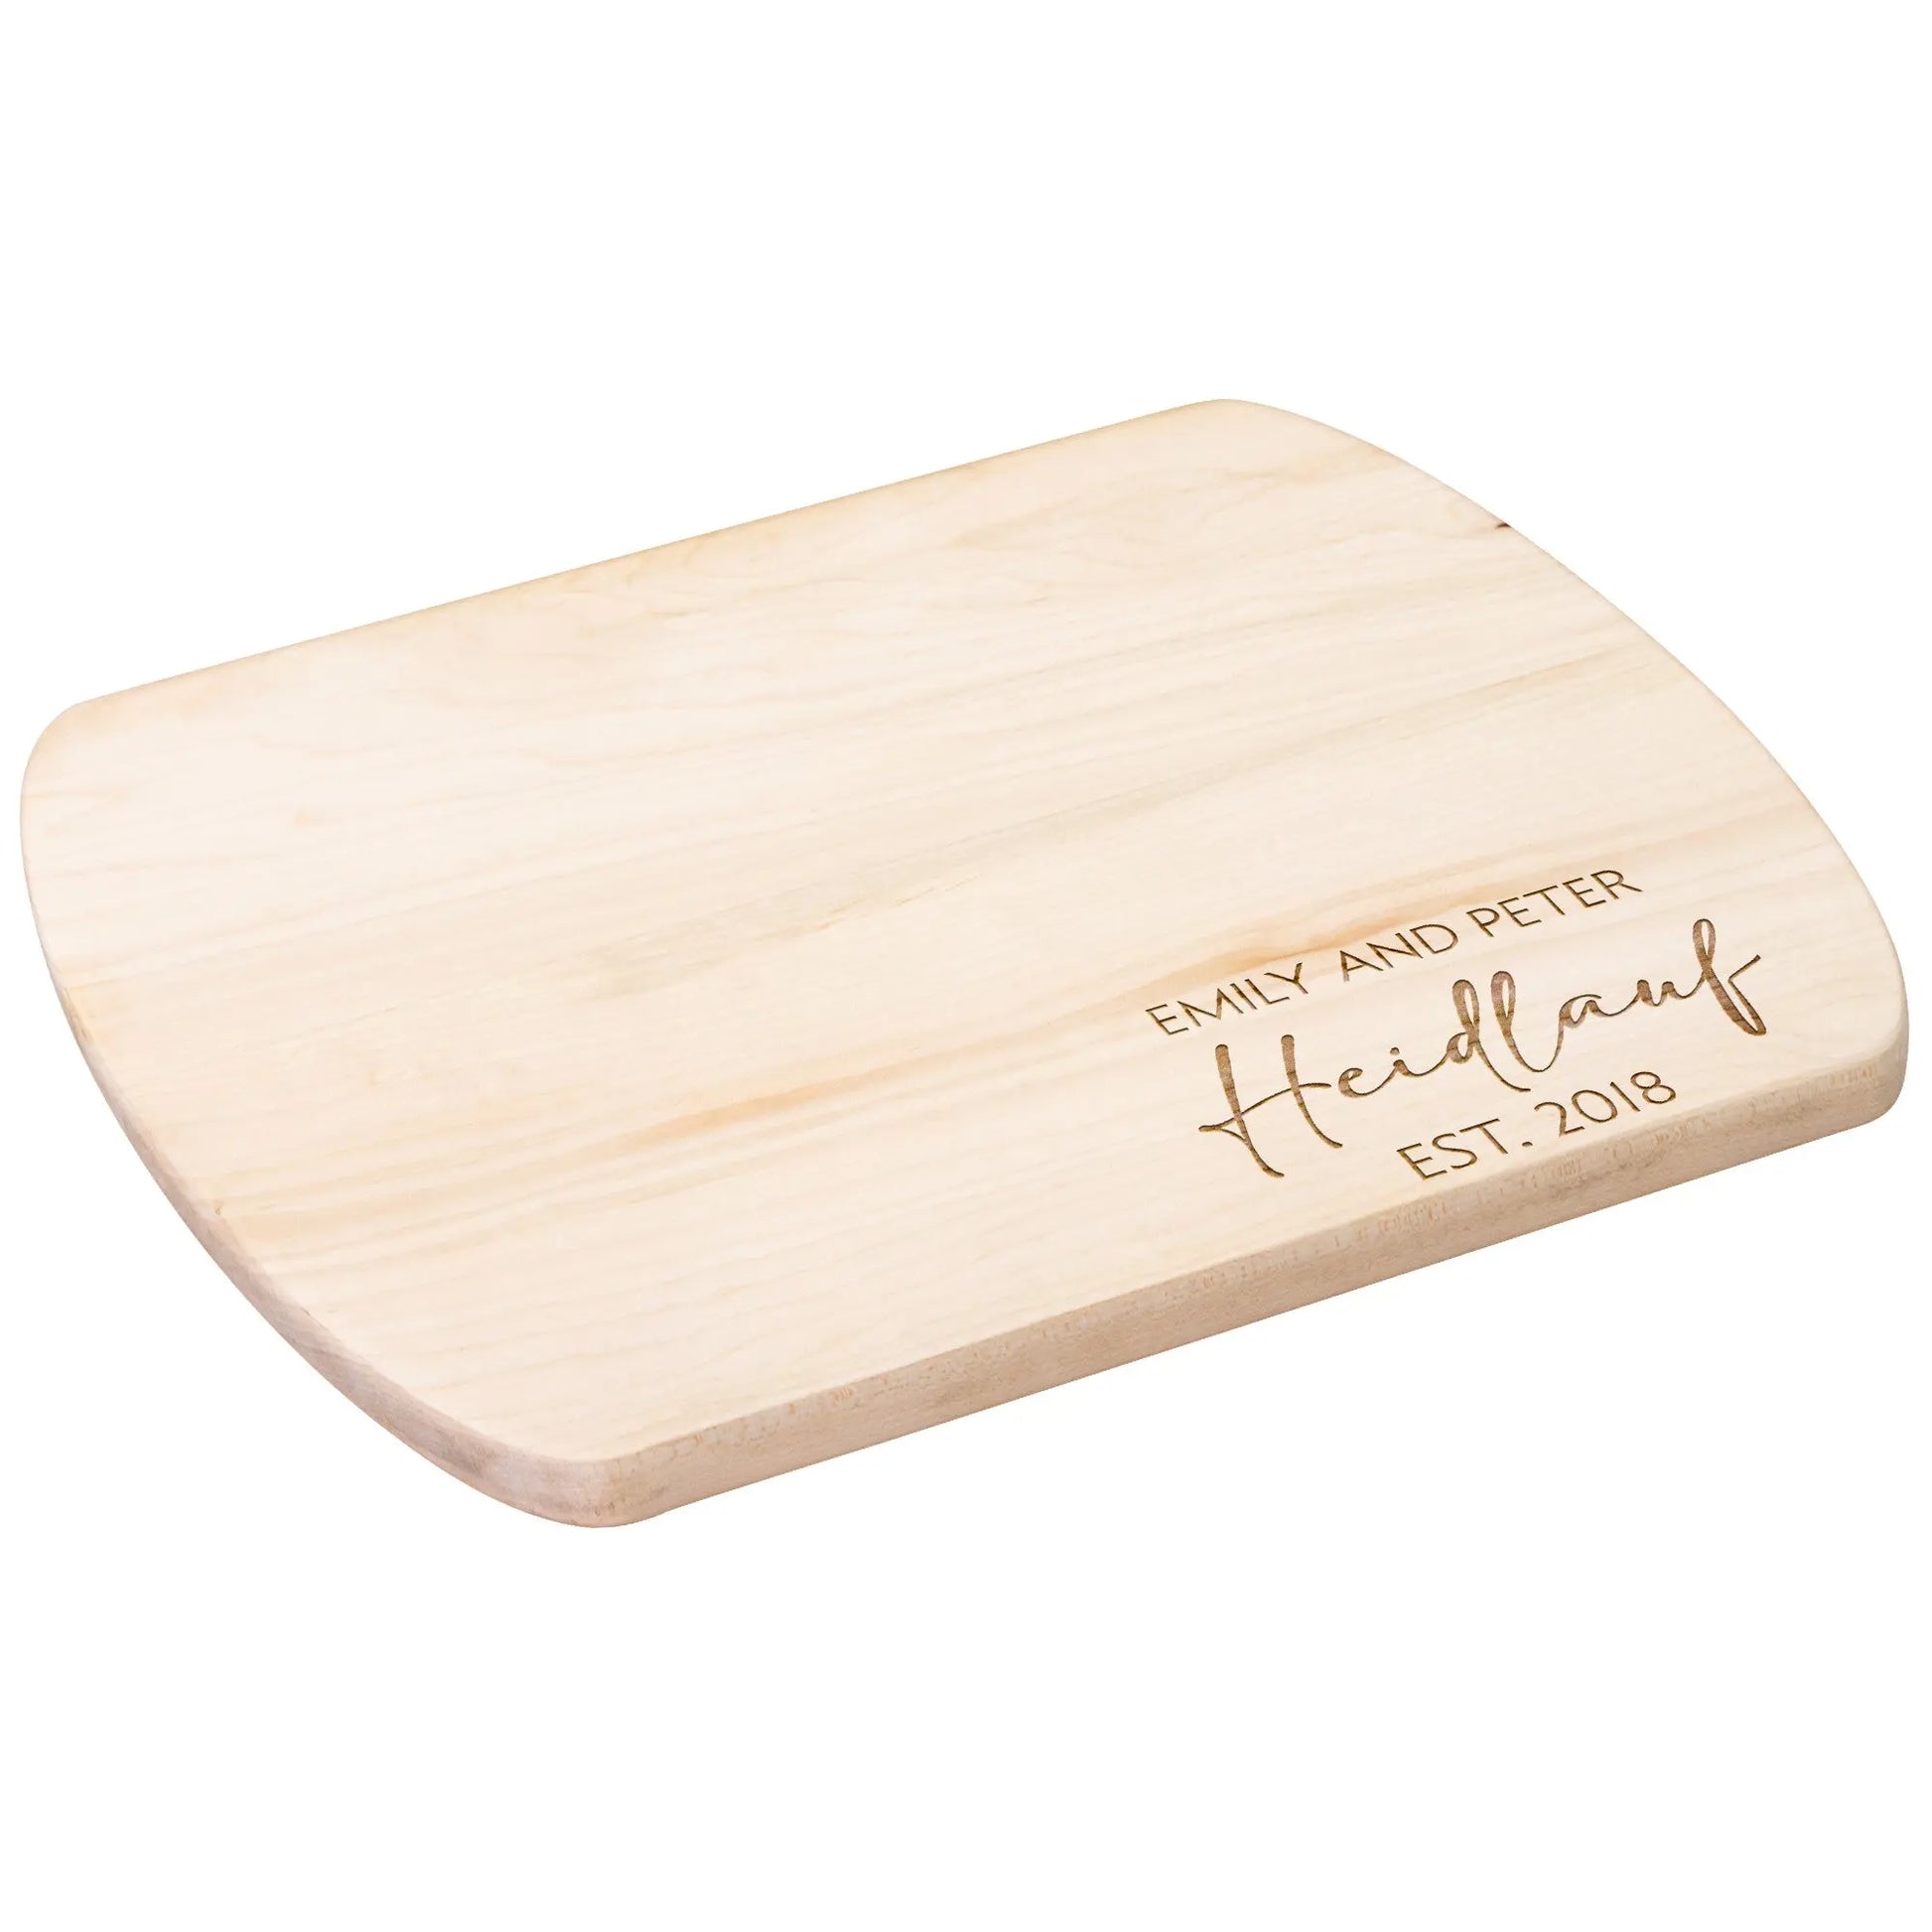 Charcuterie Board Personalized Serving Board Engraved Cheese Board Newly Wed Gift Christmas Gift for Couple Wedding Shower Gift teelaunch